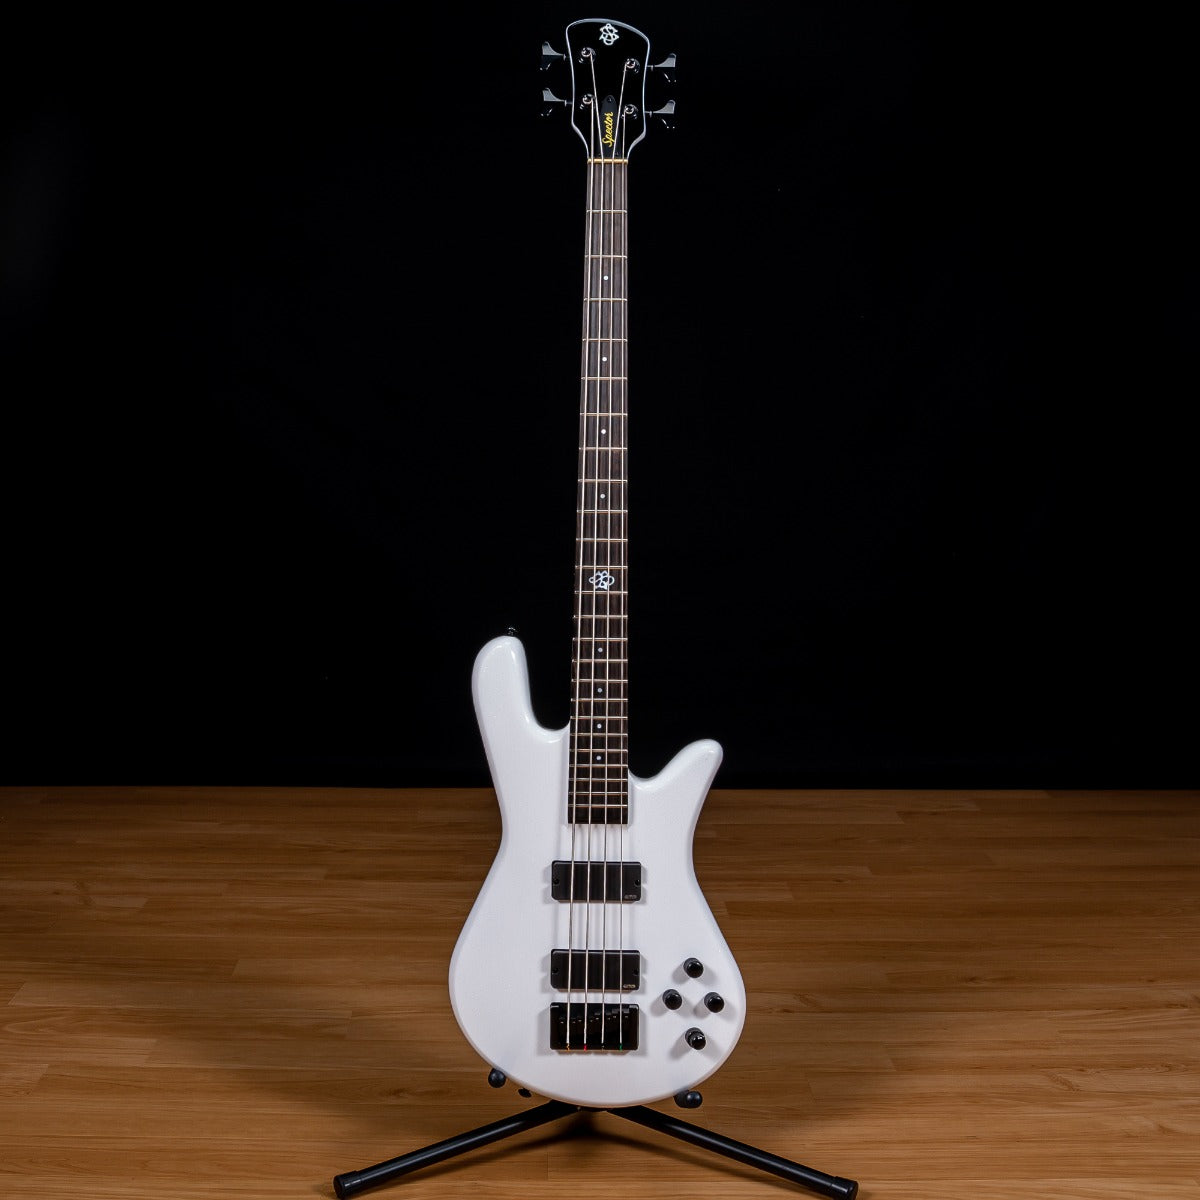 Spector NS Ethos HP 4 Bass Guitar - White Sparkle Gloss view 2